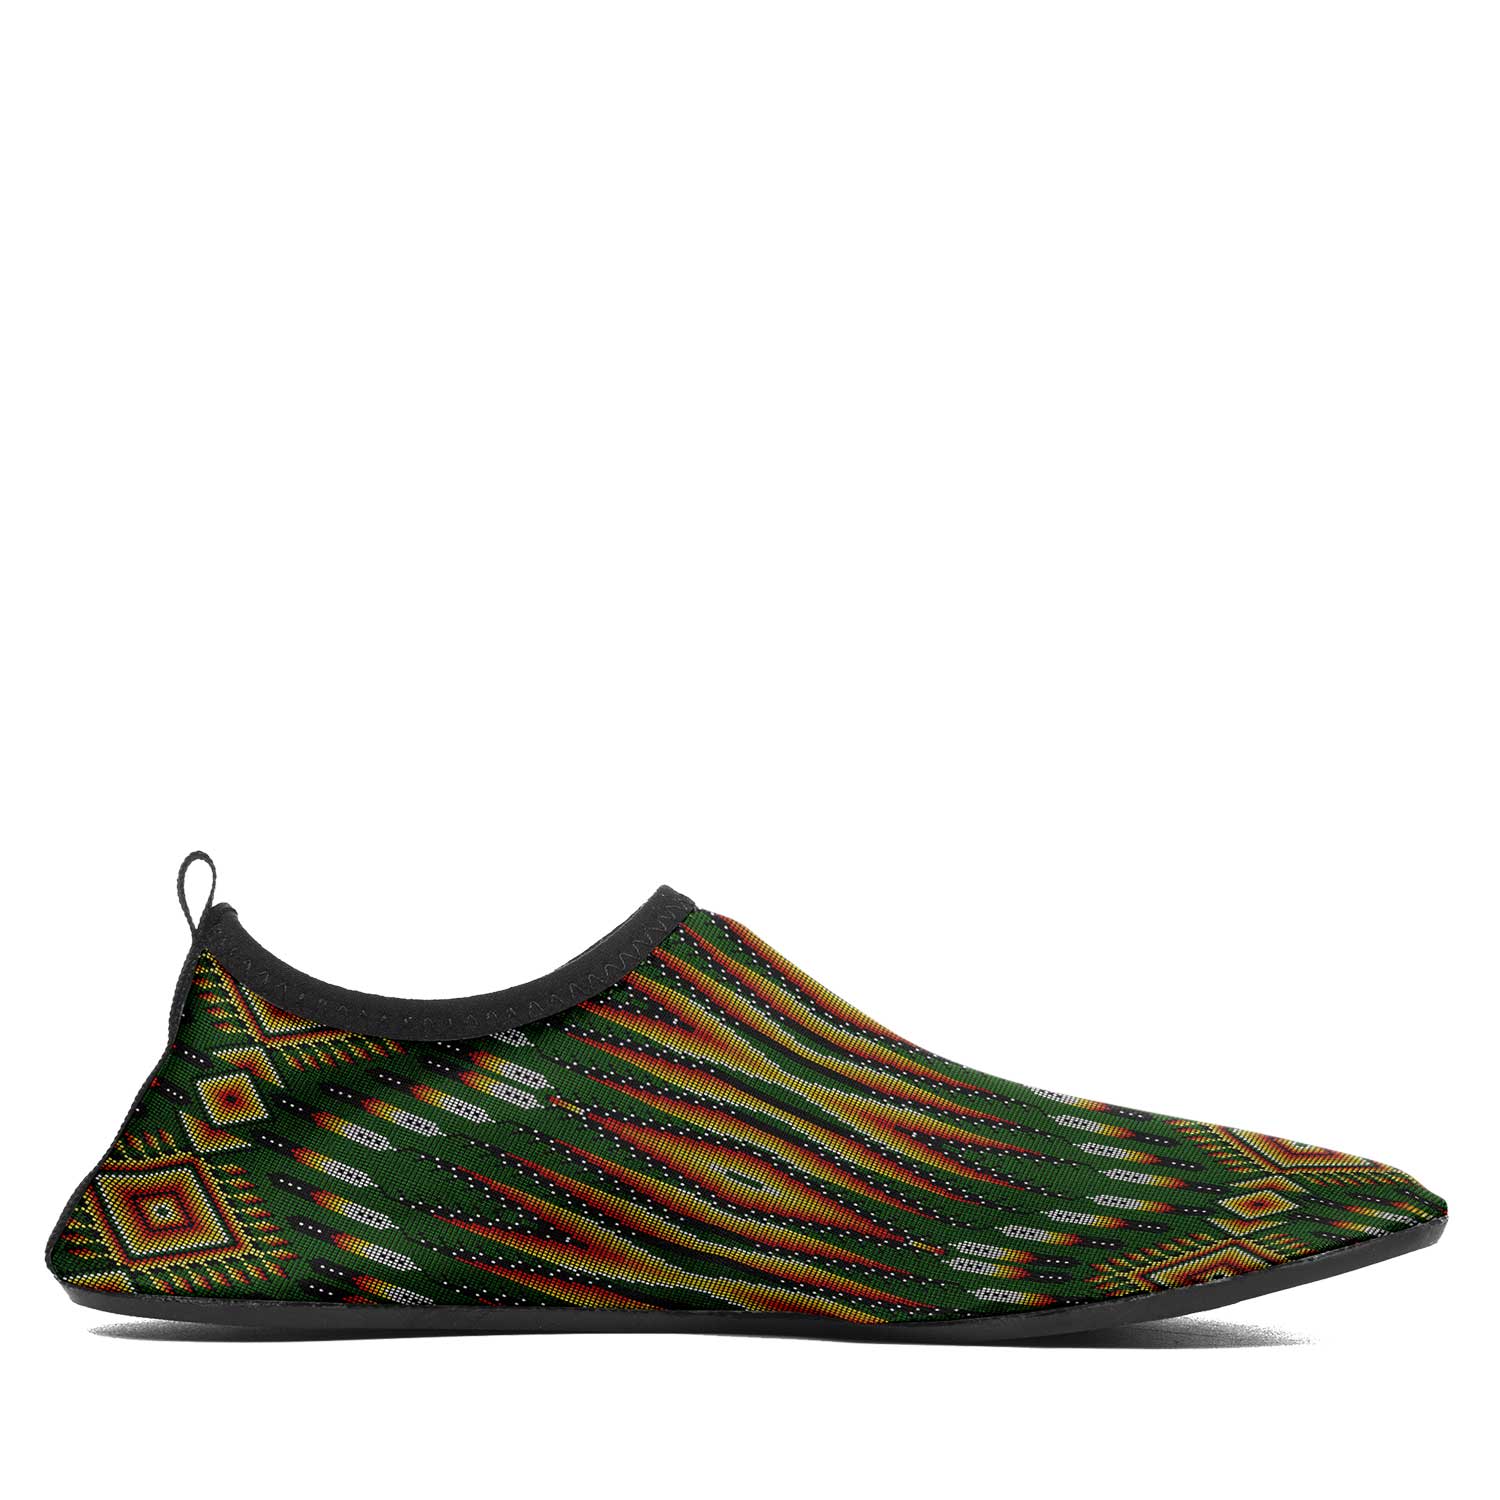 Fire Feather Green Kid's Sockamoccs Slip On Shoes